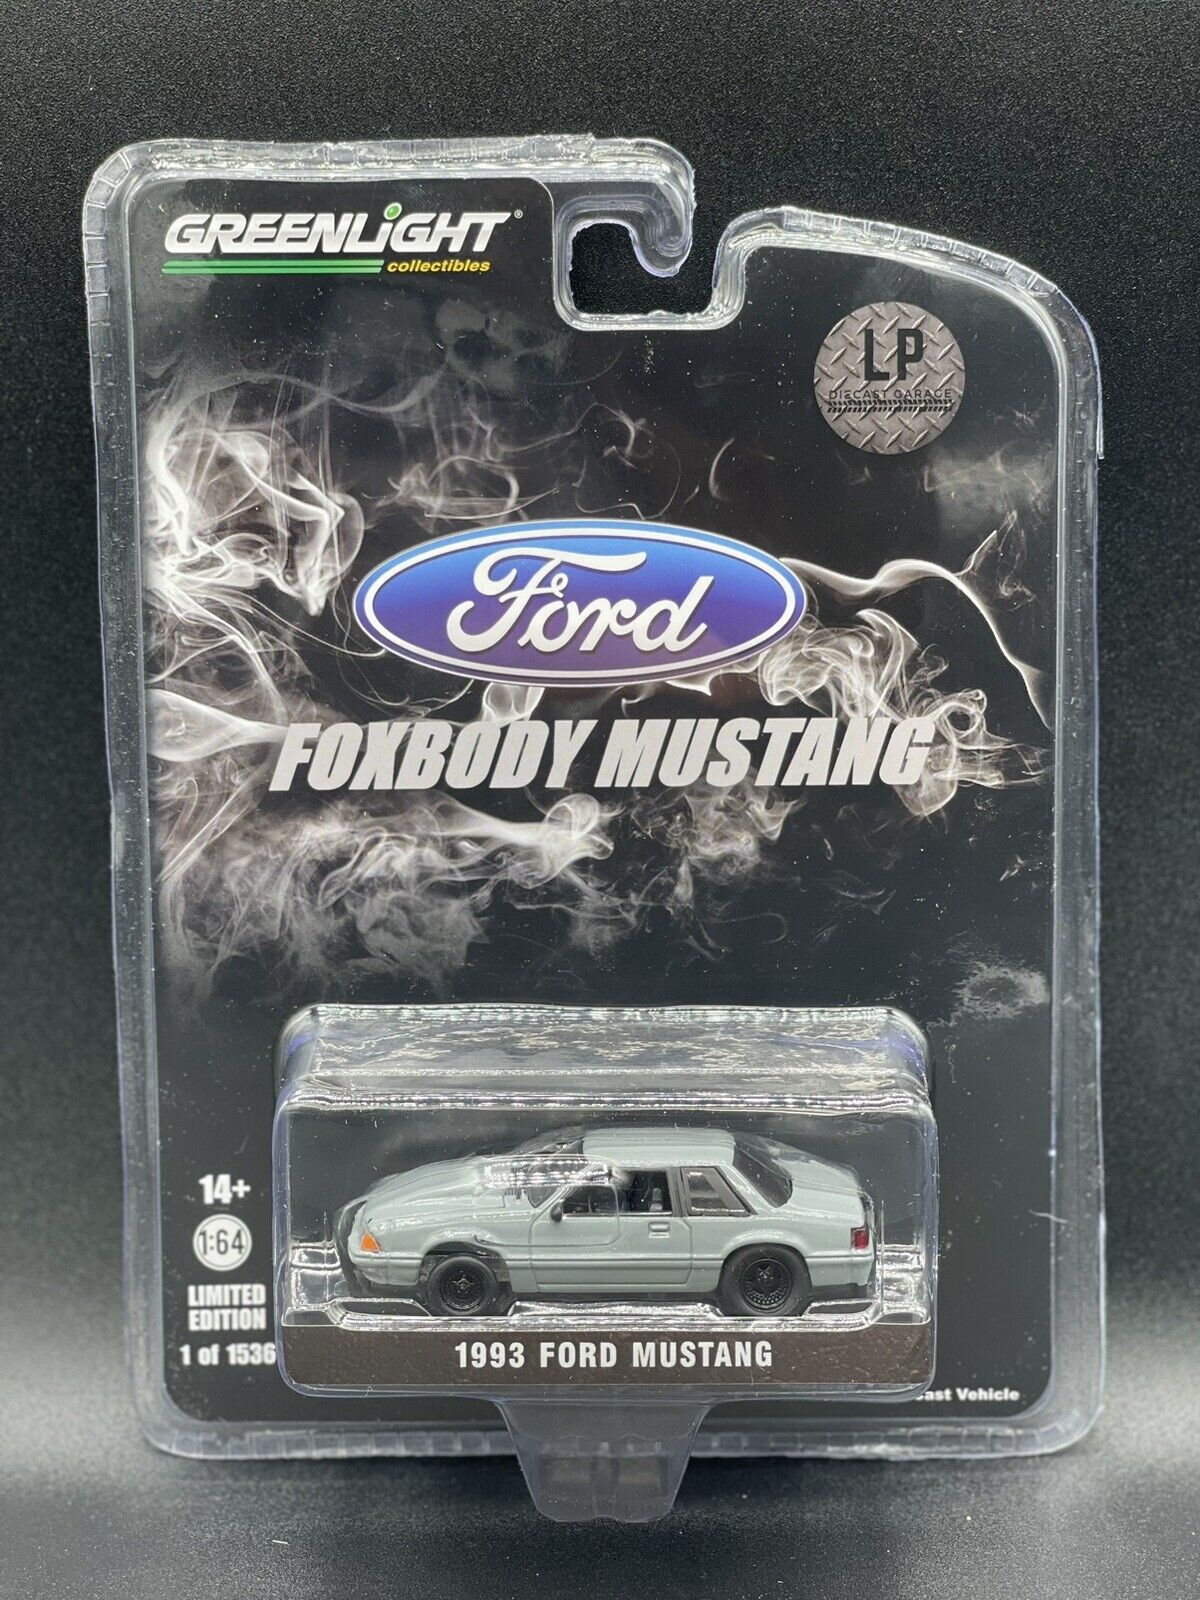 GREENLIGHT 1993 Ford Mustang 5.0 LX Coupe Destroyer Gray Drag LP Diecast 1:64